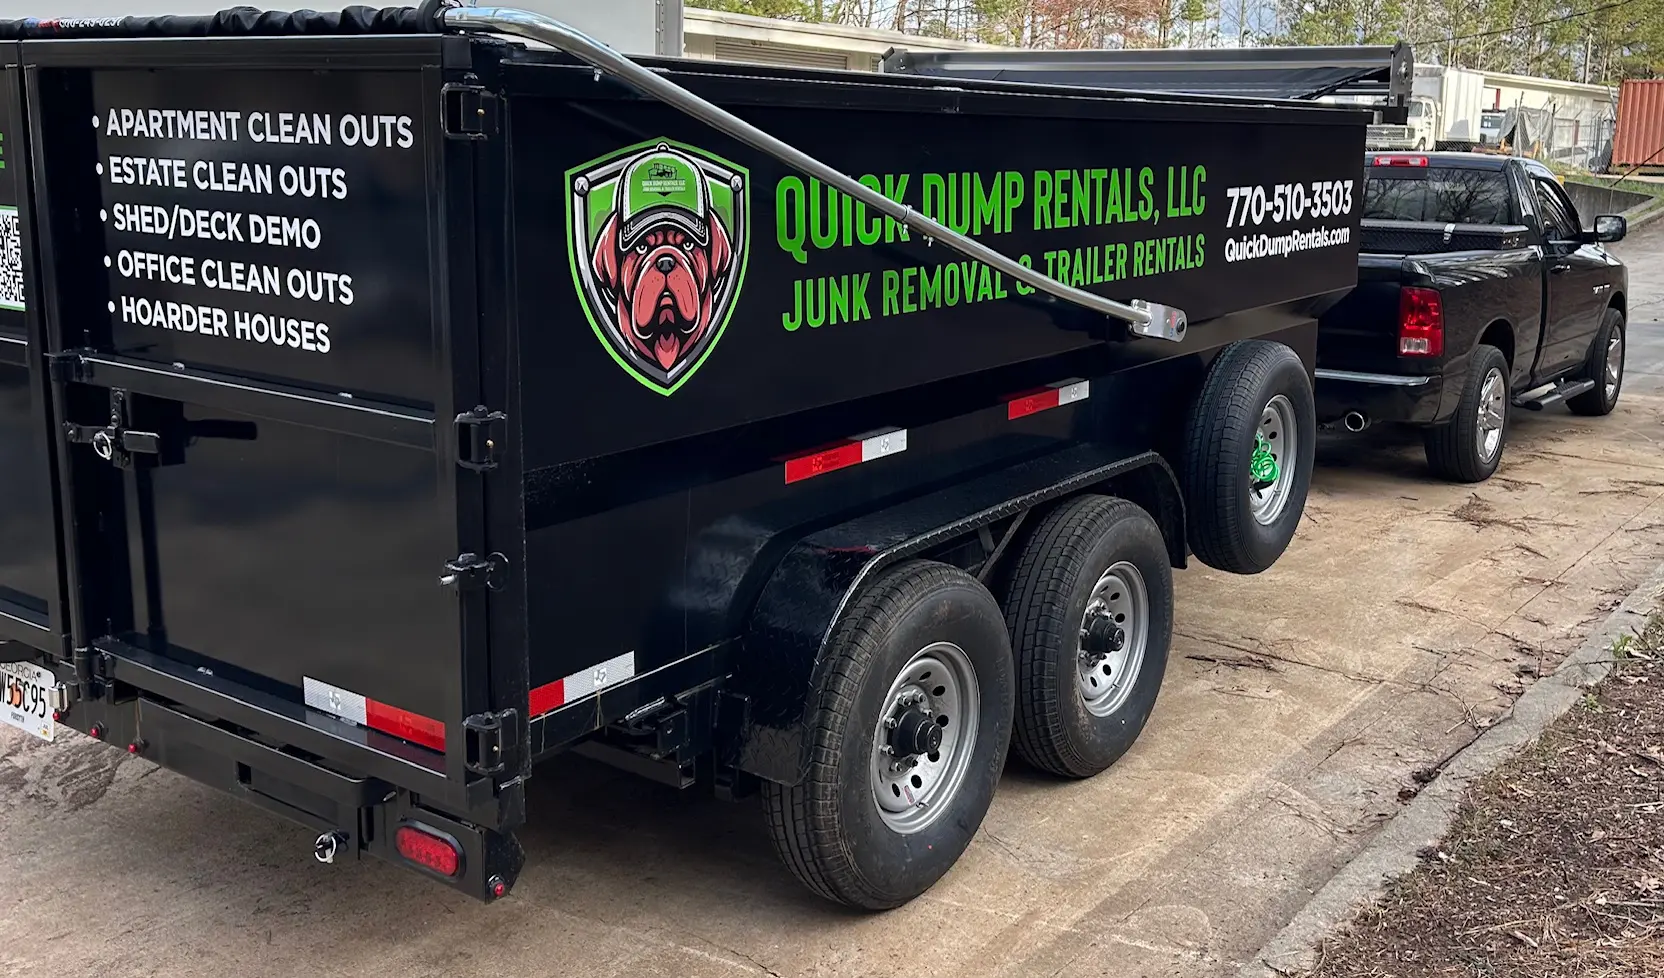 A dump truck with the company logo on it.